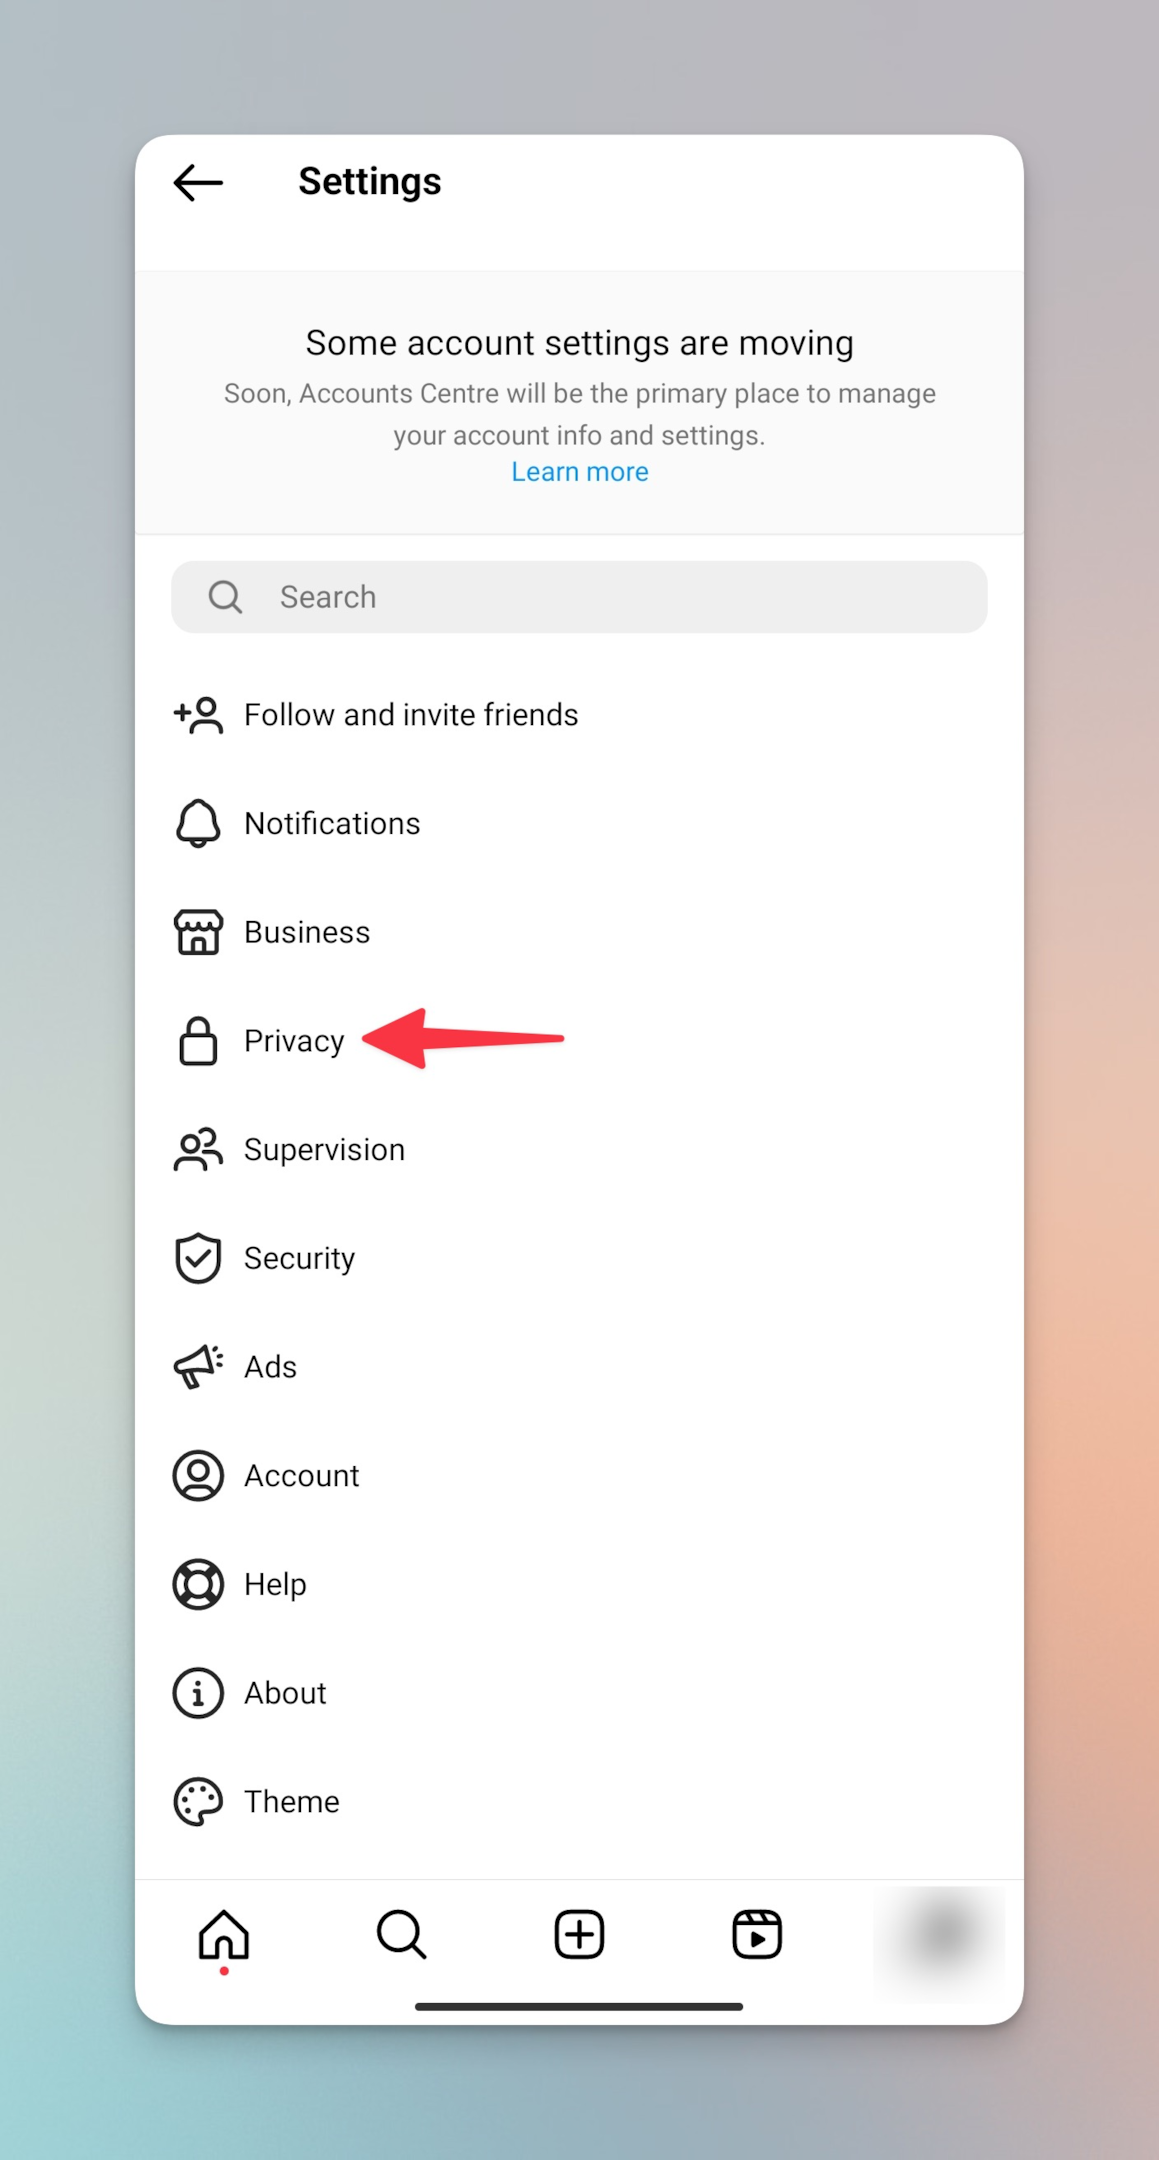 Remote.tools shows a screenshot of Instagram home feed pointing to Privacy button on settings page to switch your Instagram account to private